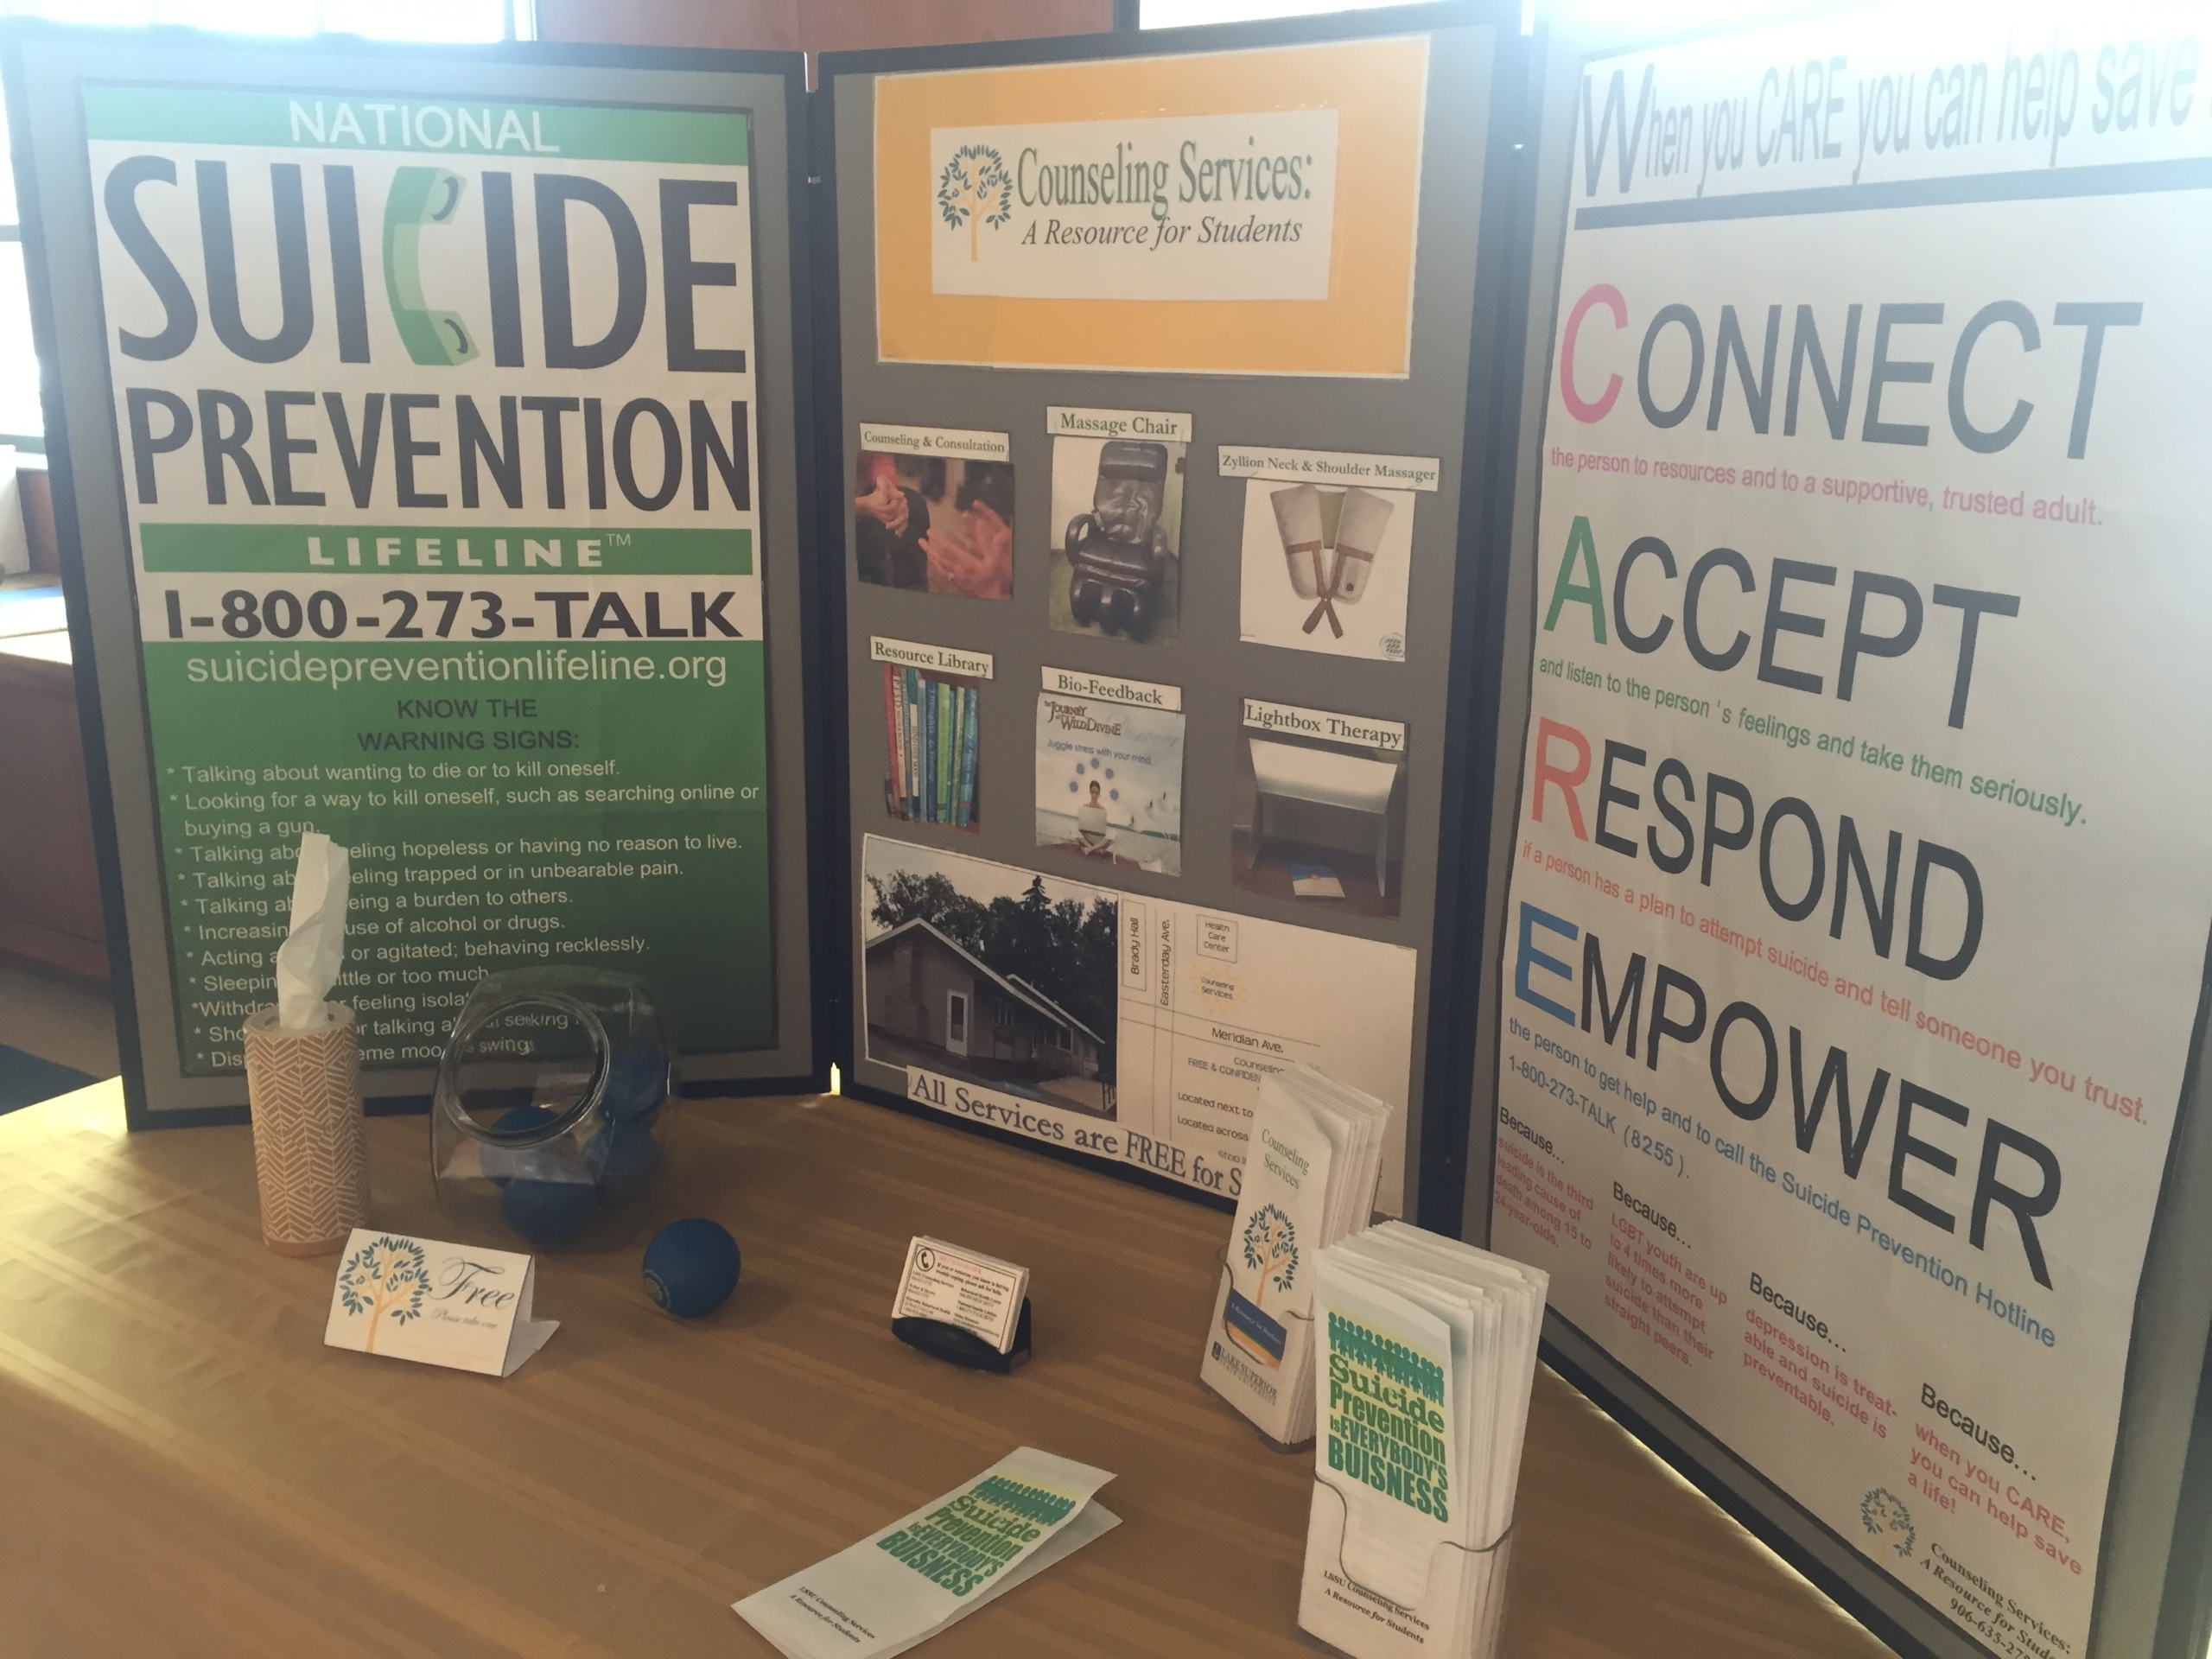 Information about suicide prevention is on display, including the Suicide Prevention Lifeline number 1-800-273-8255